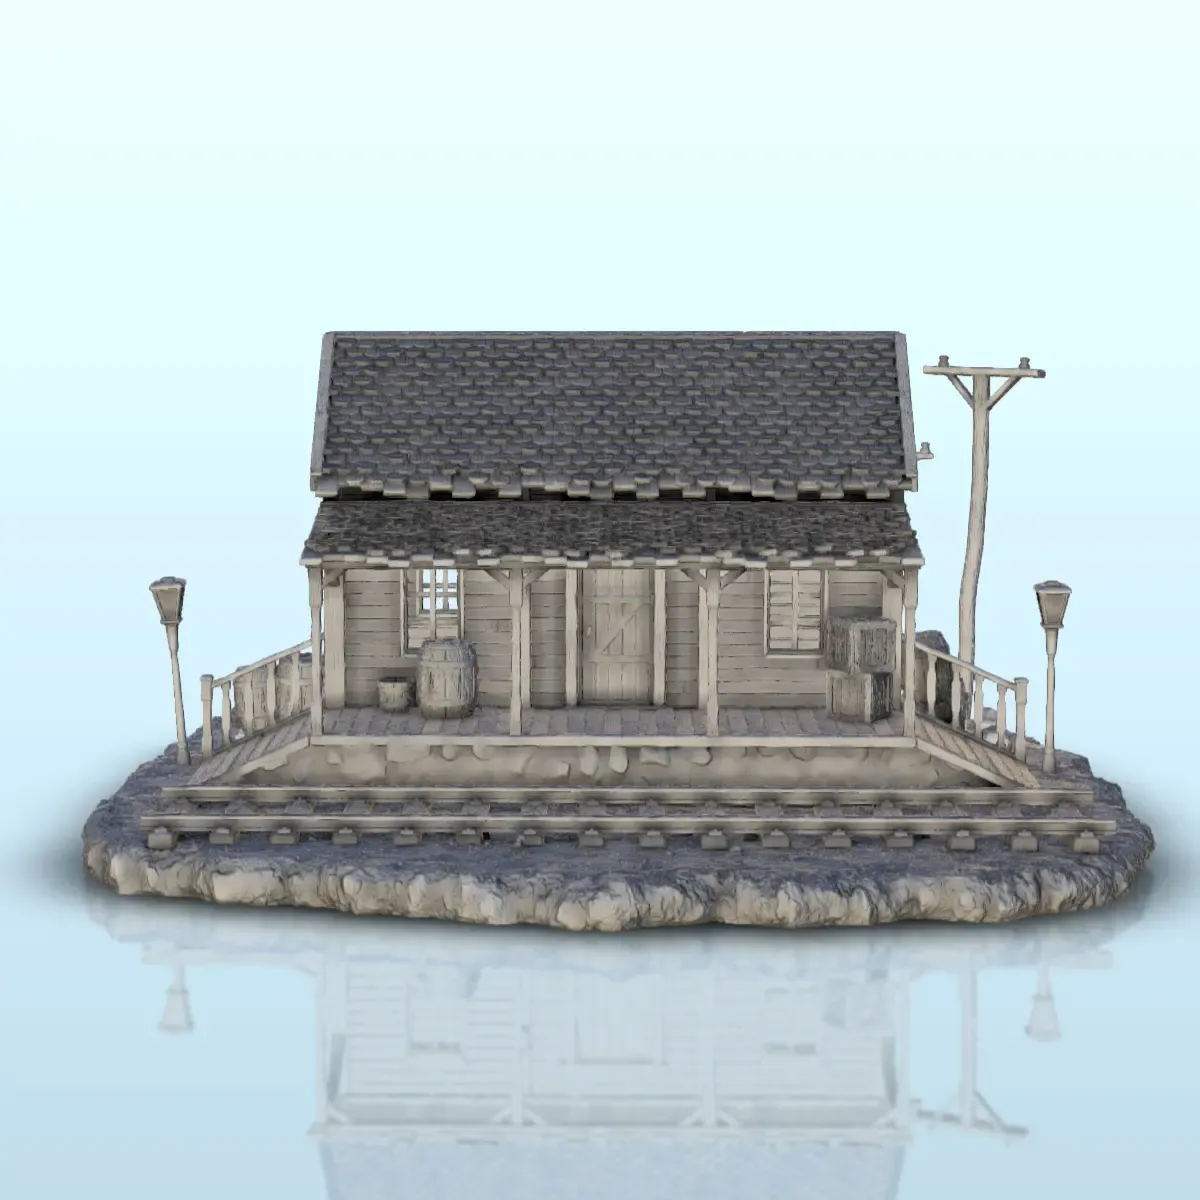 Country train station - Terrain scenery West Old